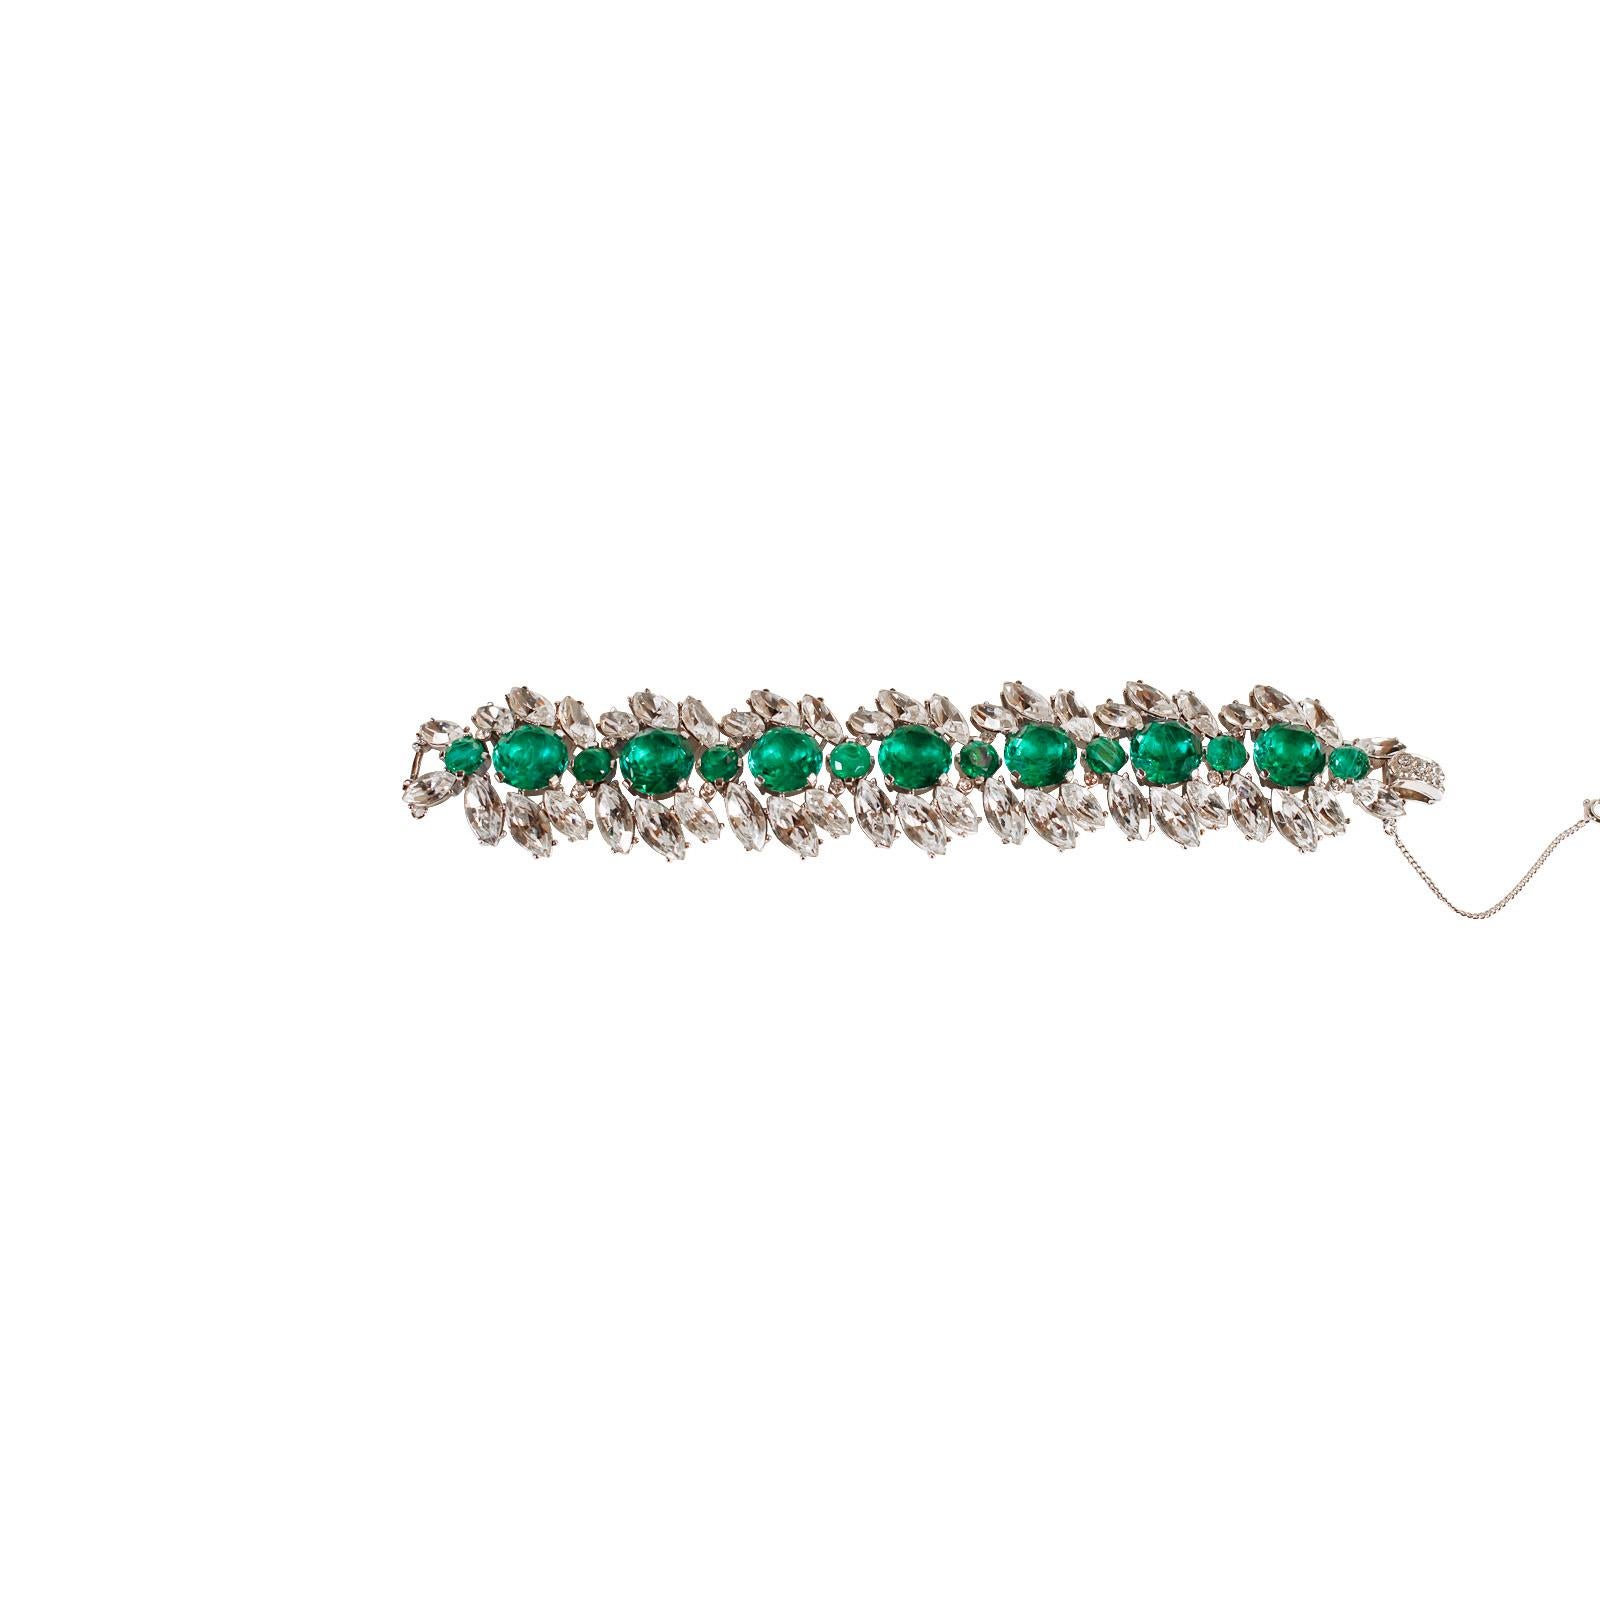 Vintage Trifari Emerald Green and Crystal Bracelet Circa 1960s For Sale 5